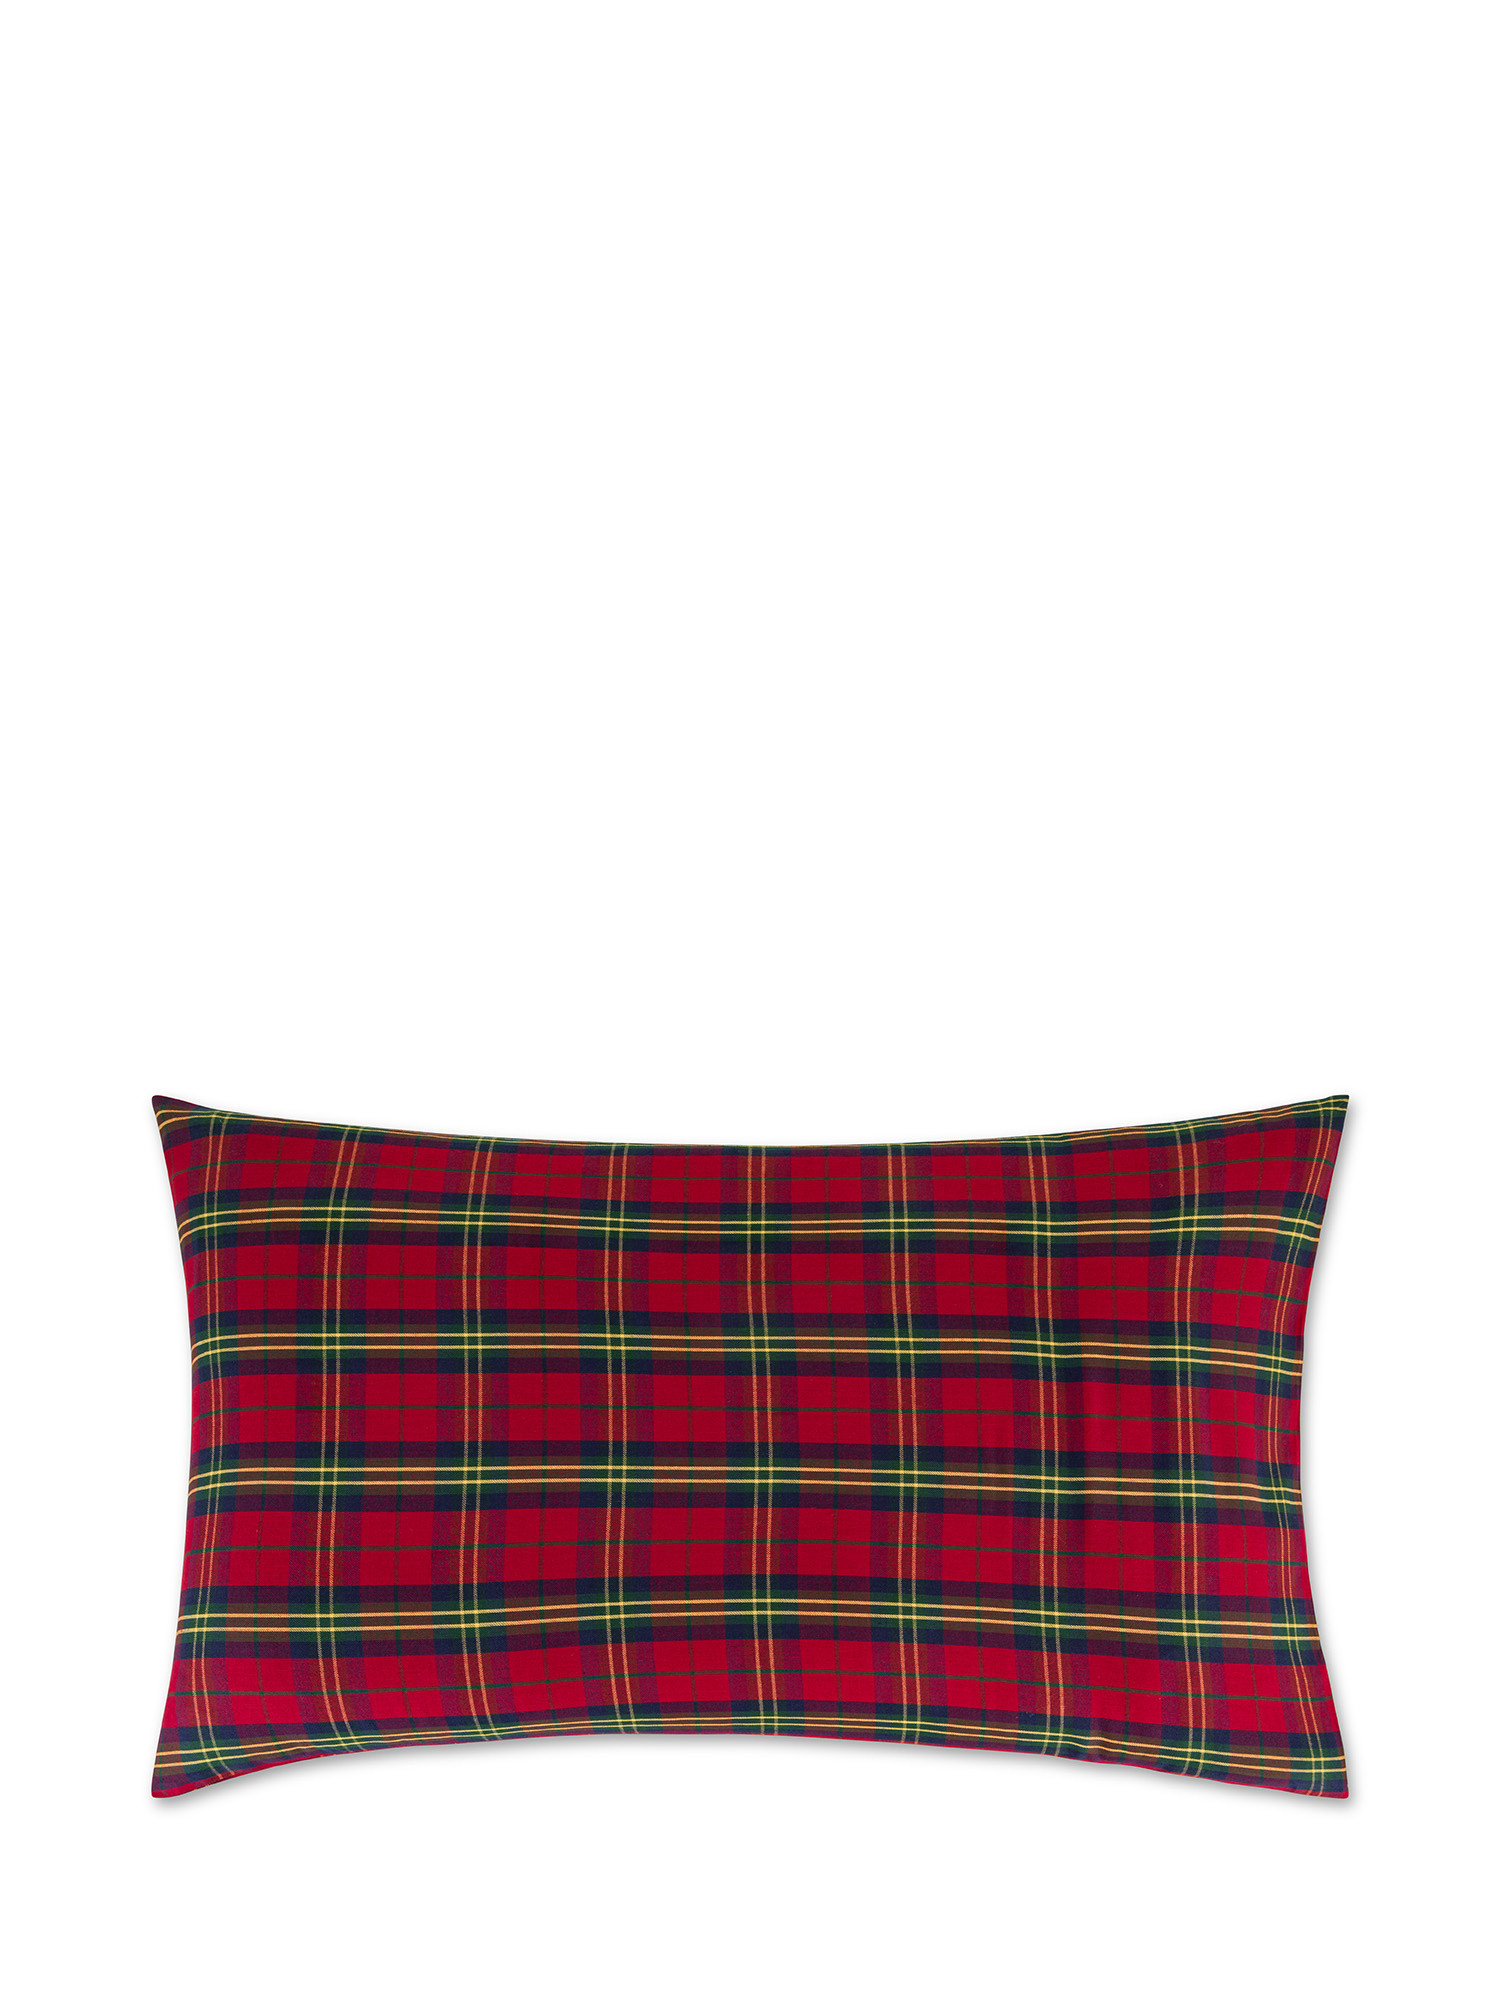 Cotton flannelette tartan pillowcase, Red, large image number 0